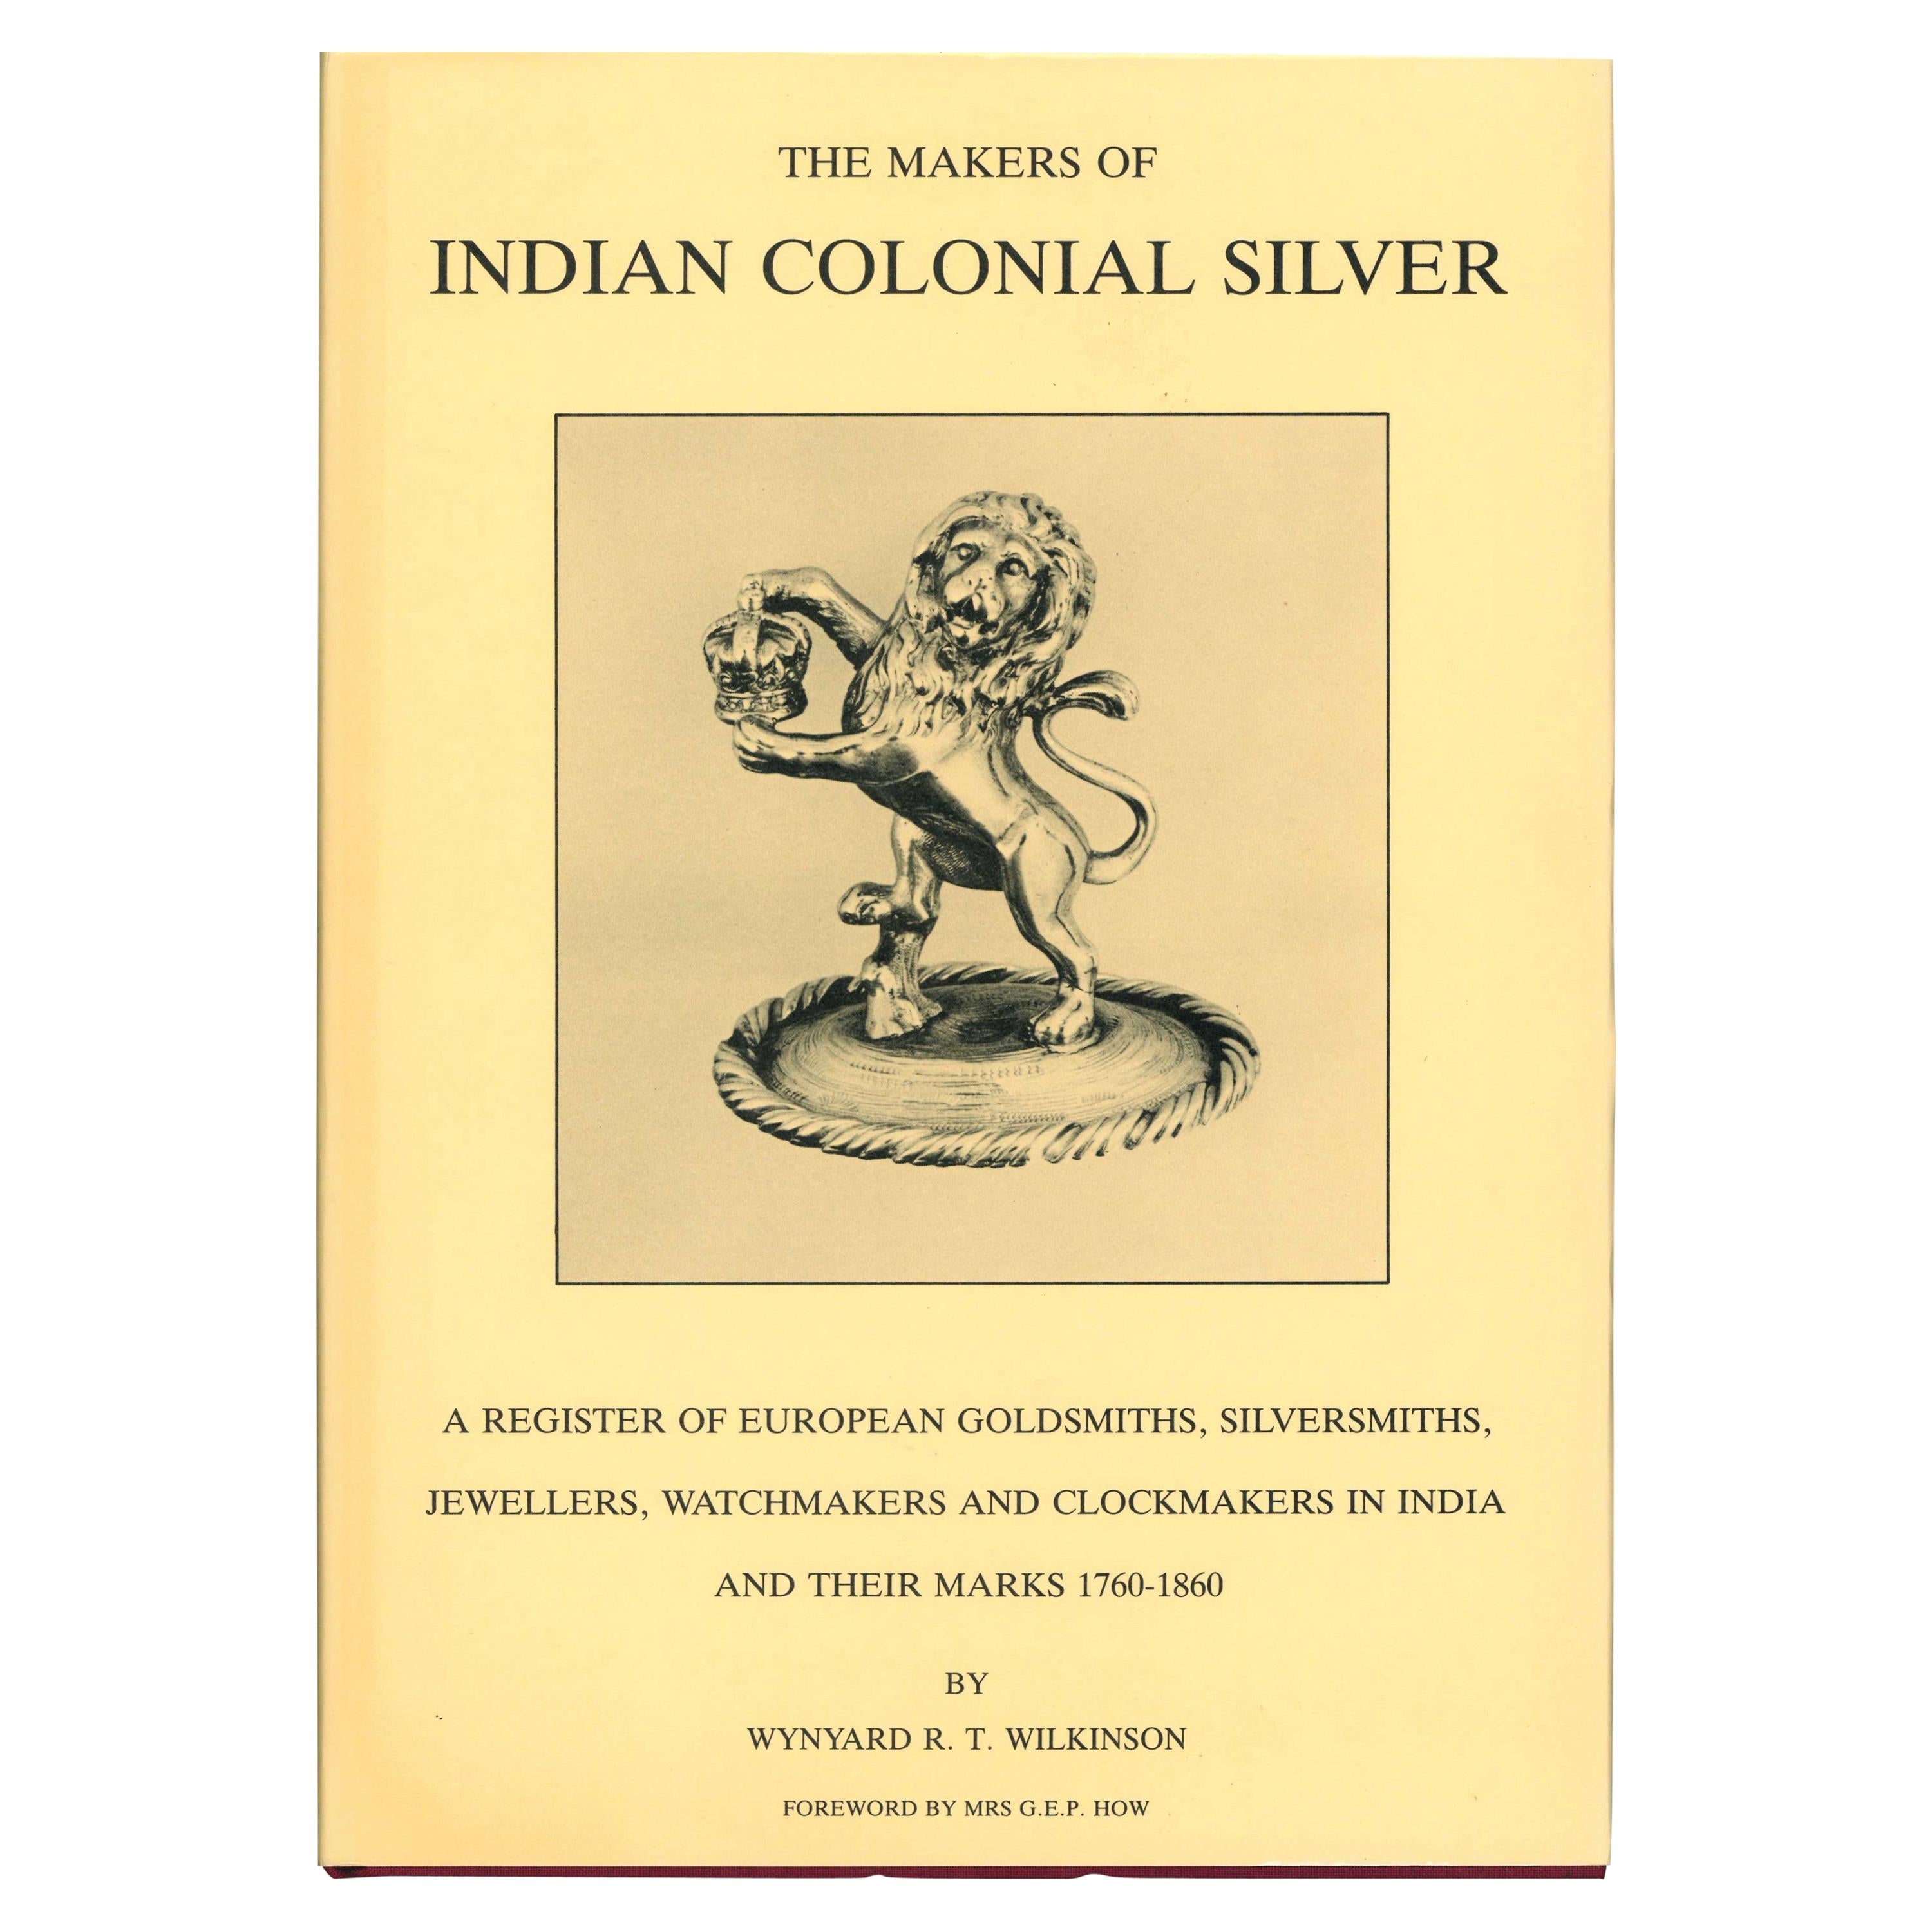 The Makers of Indian Colonial Silver by Wynyard R. T. Wilkinson (Book)